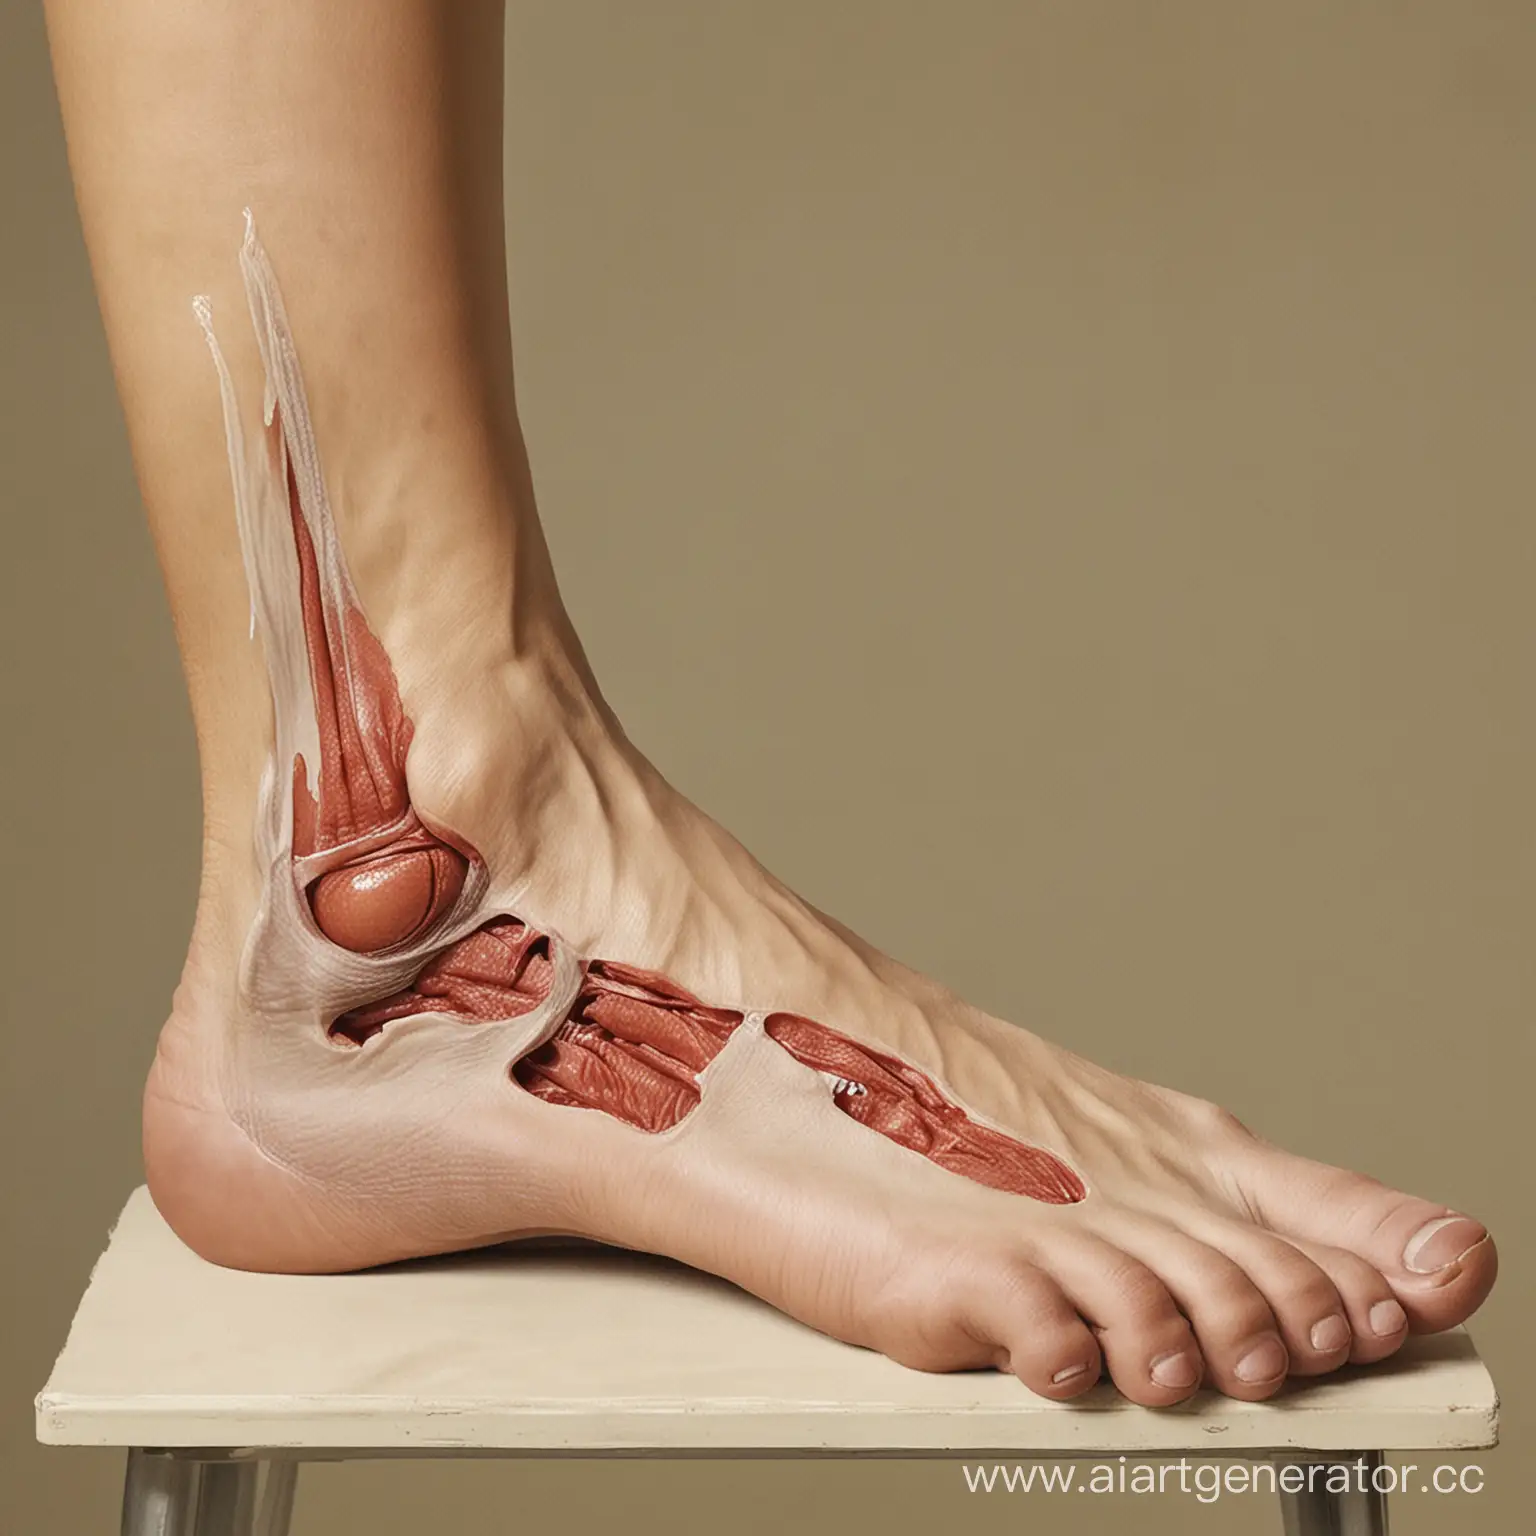 Medical-Procedure-Amputation-of-the-Foot